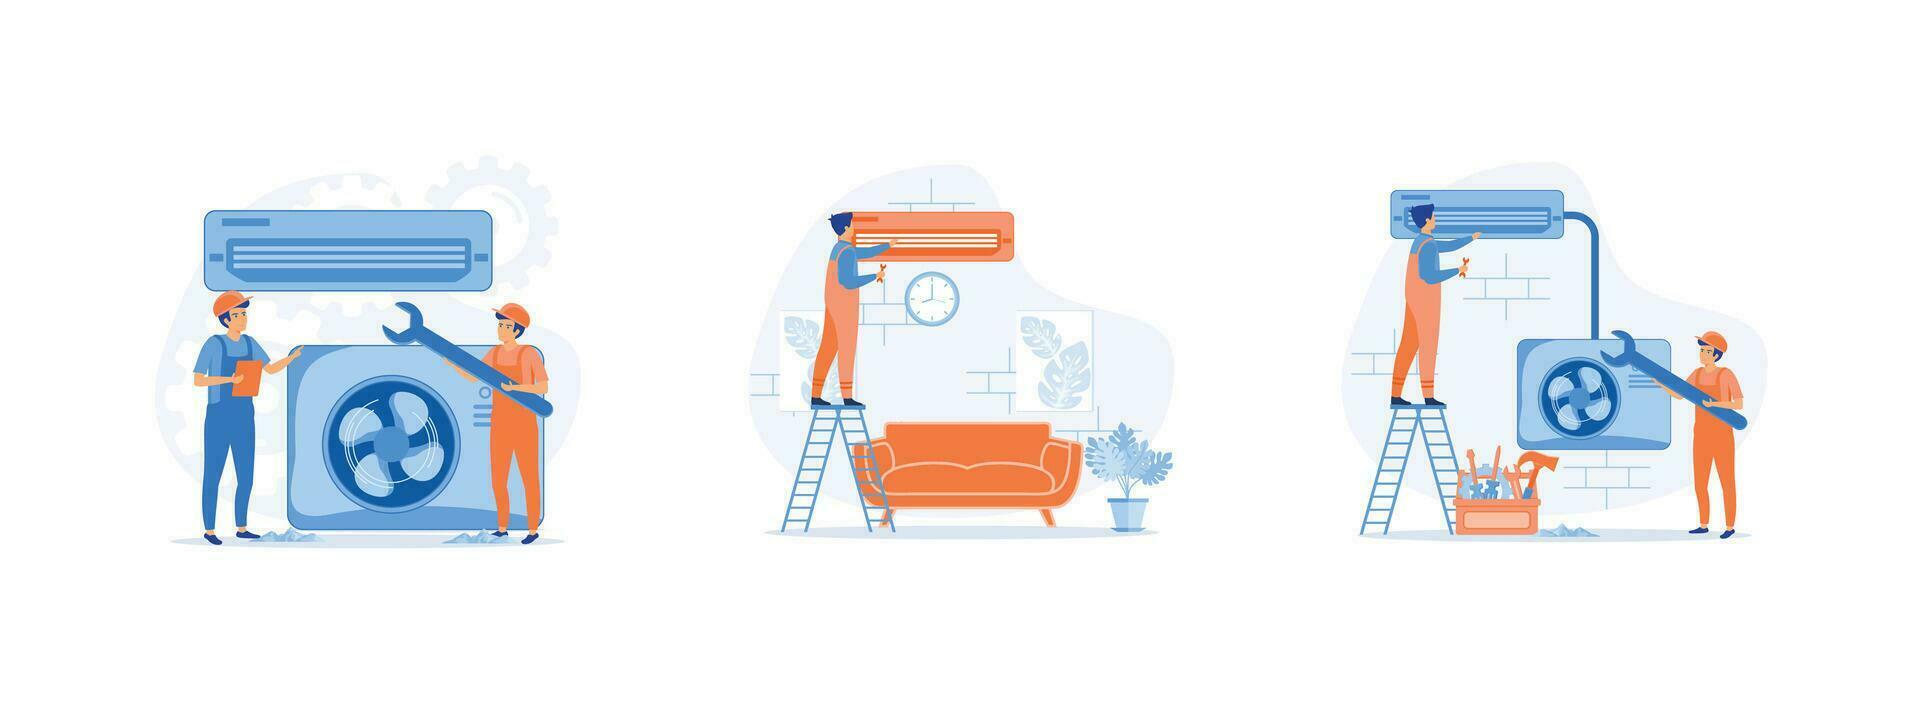 Professional service for repair of air conditioners, Maintenance Service, Cooling System, Air Conditioner Repair or Installation Illustration with Unit Breakdown. vector